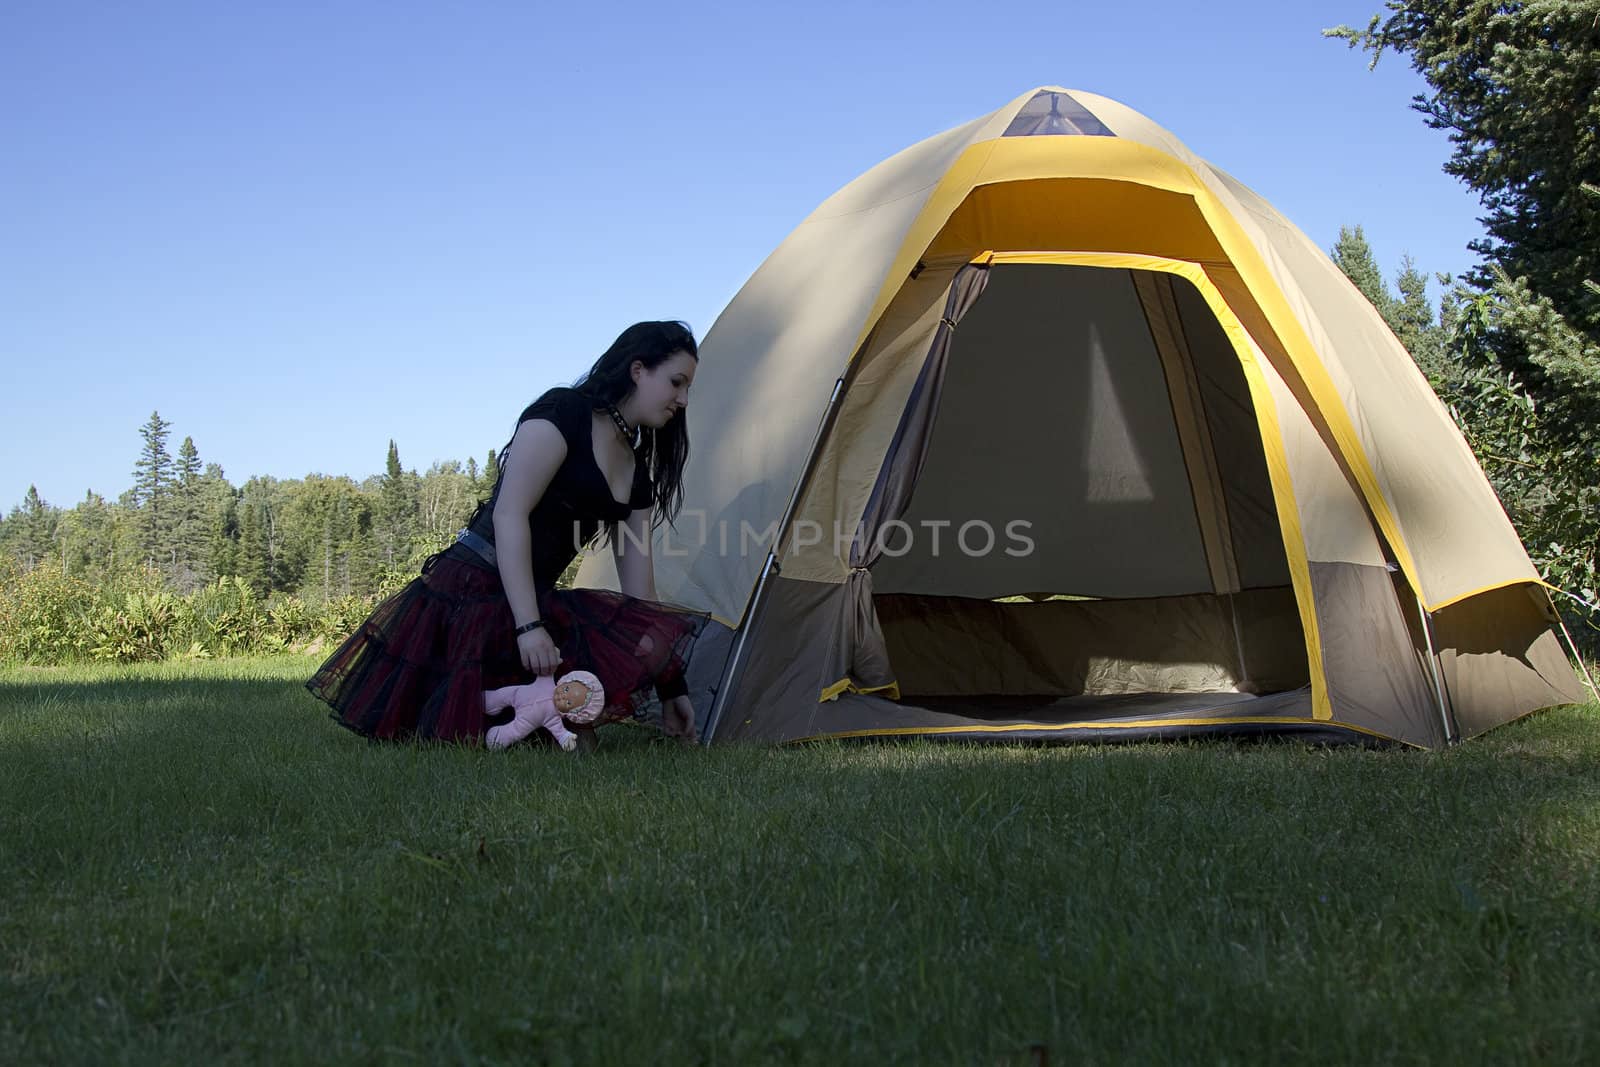 twenty something women wearing goth style clothes and holding a small baby doll adjusting a camping tent